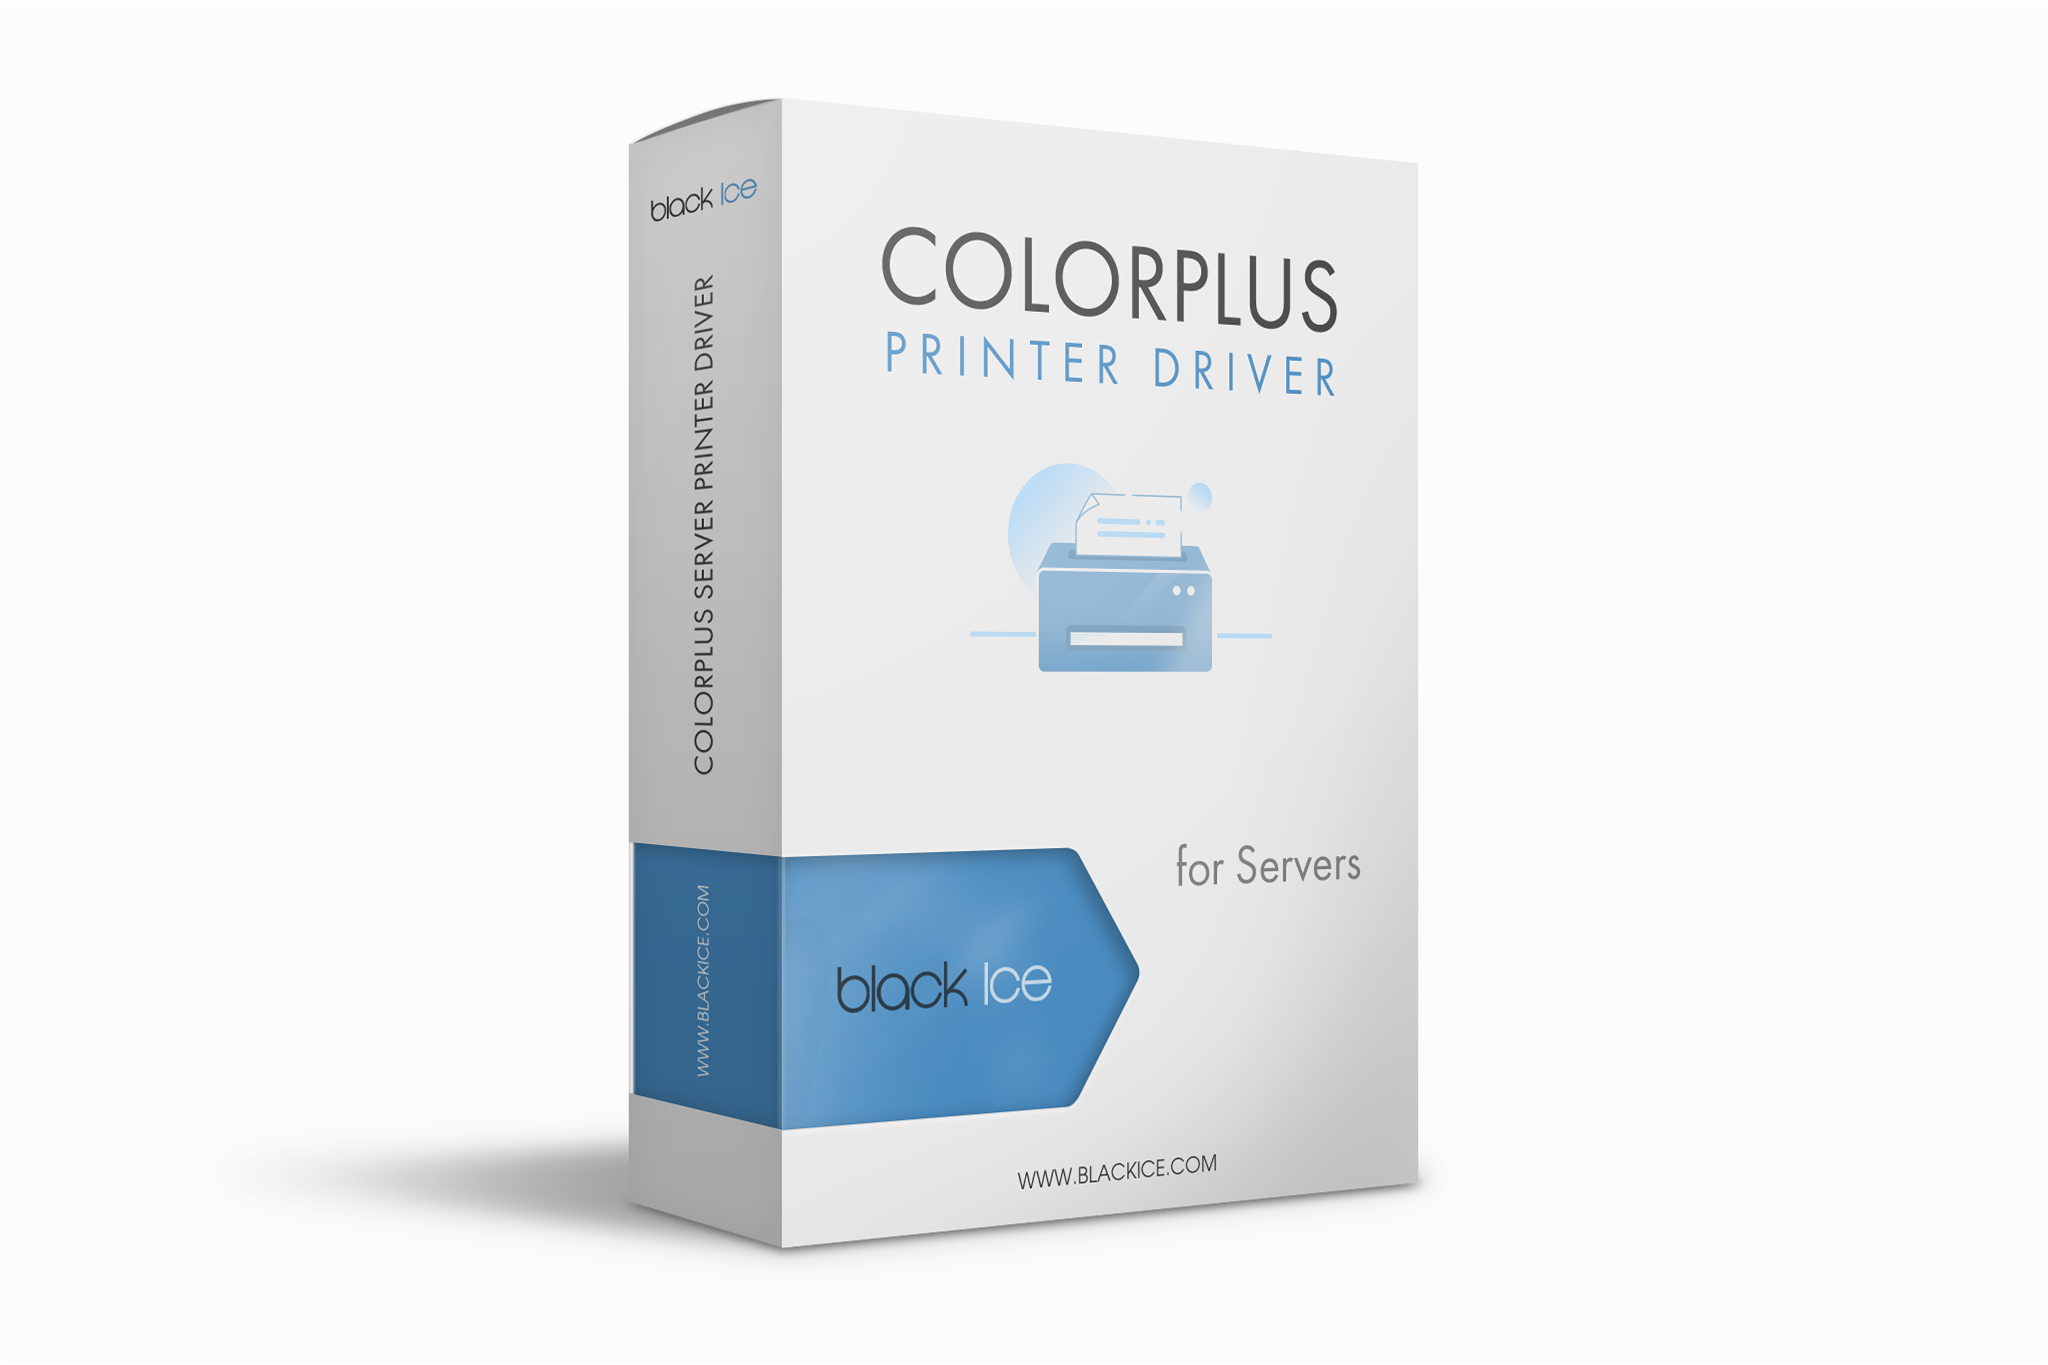 ColorPlus Printer Driver Server Subscription (Single Server and 3 multi-printers or threads)